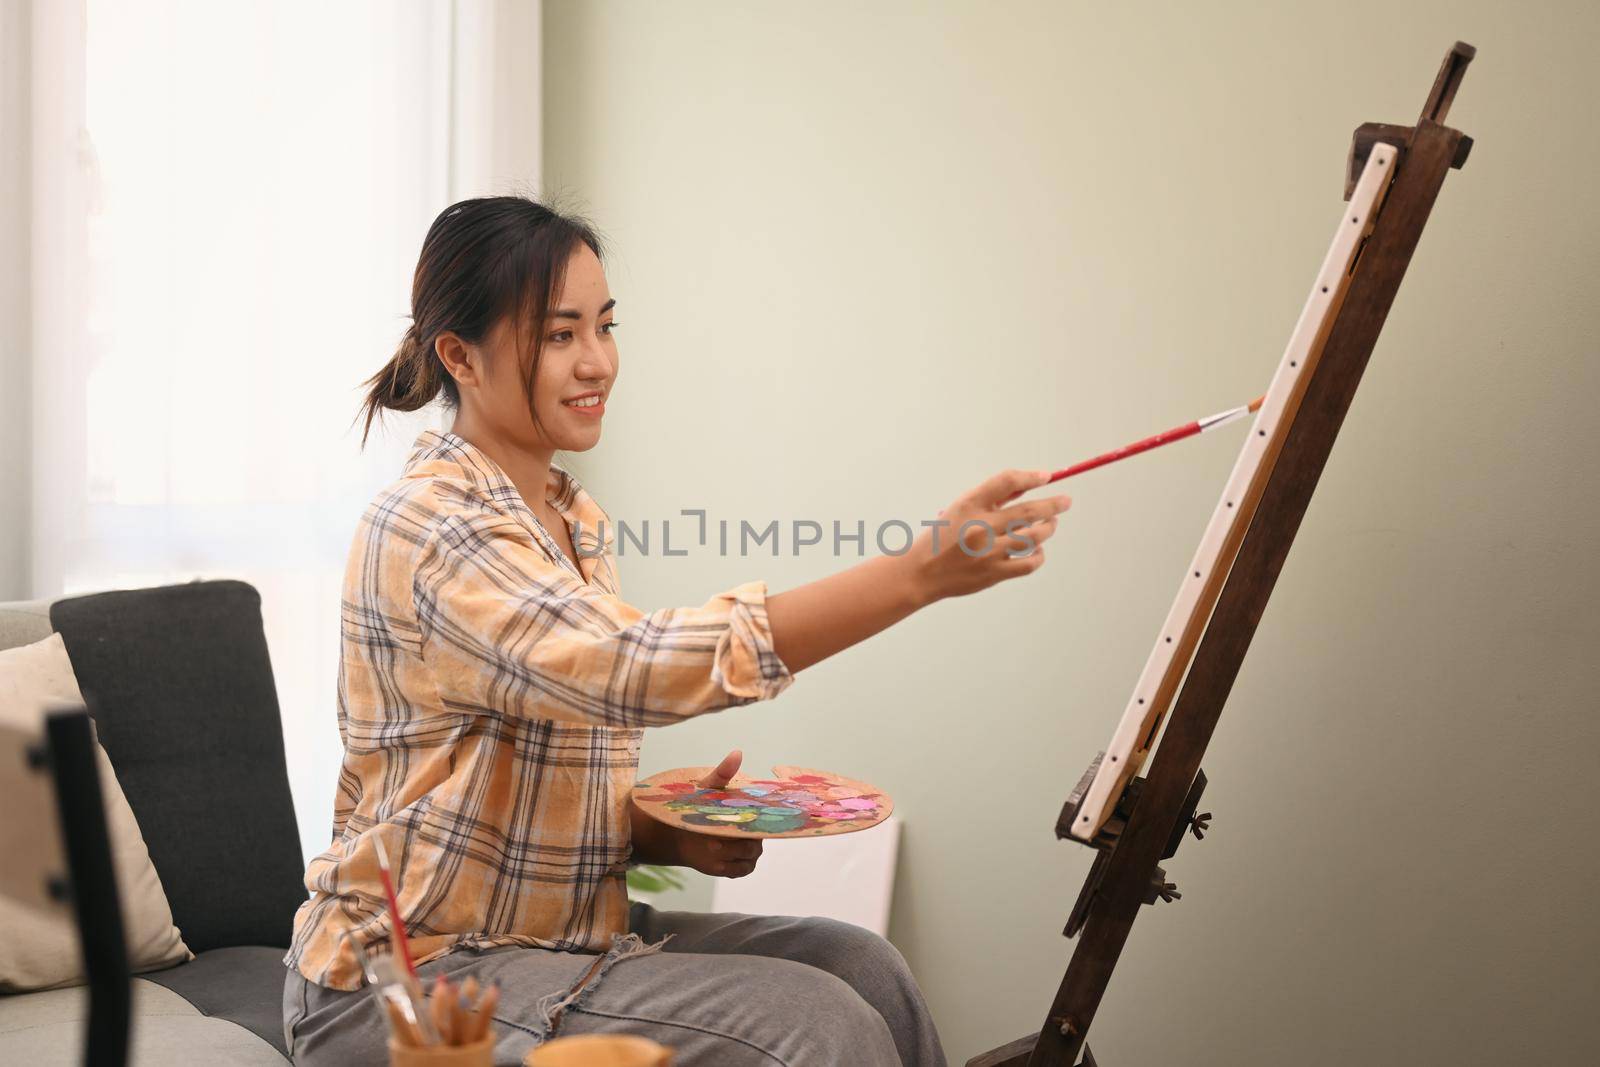 Satisfied female painter painting on easel with watercolor in comfortable workshop. Leisure activity, creative hobby and art concept by prathanchorruangsak